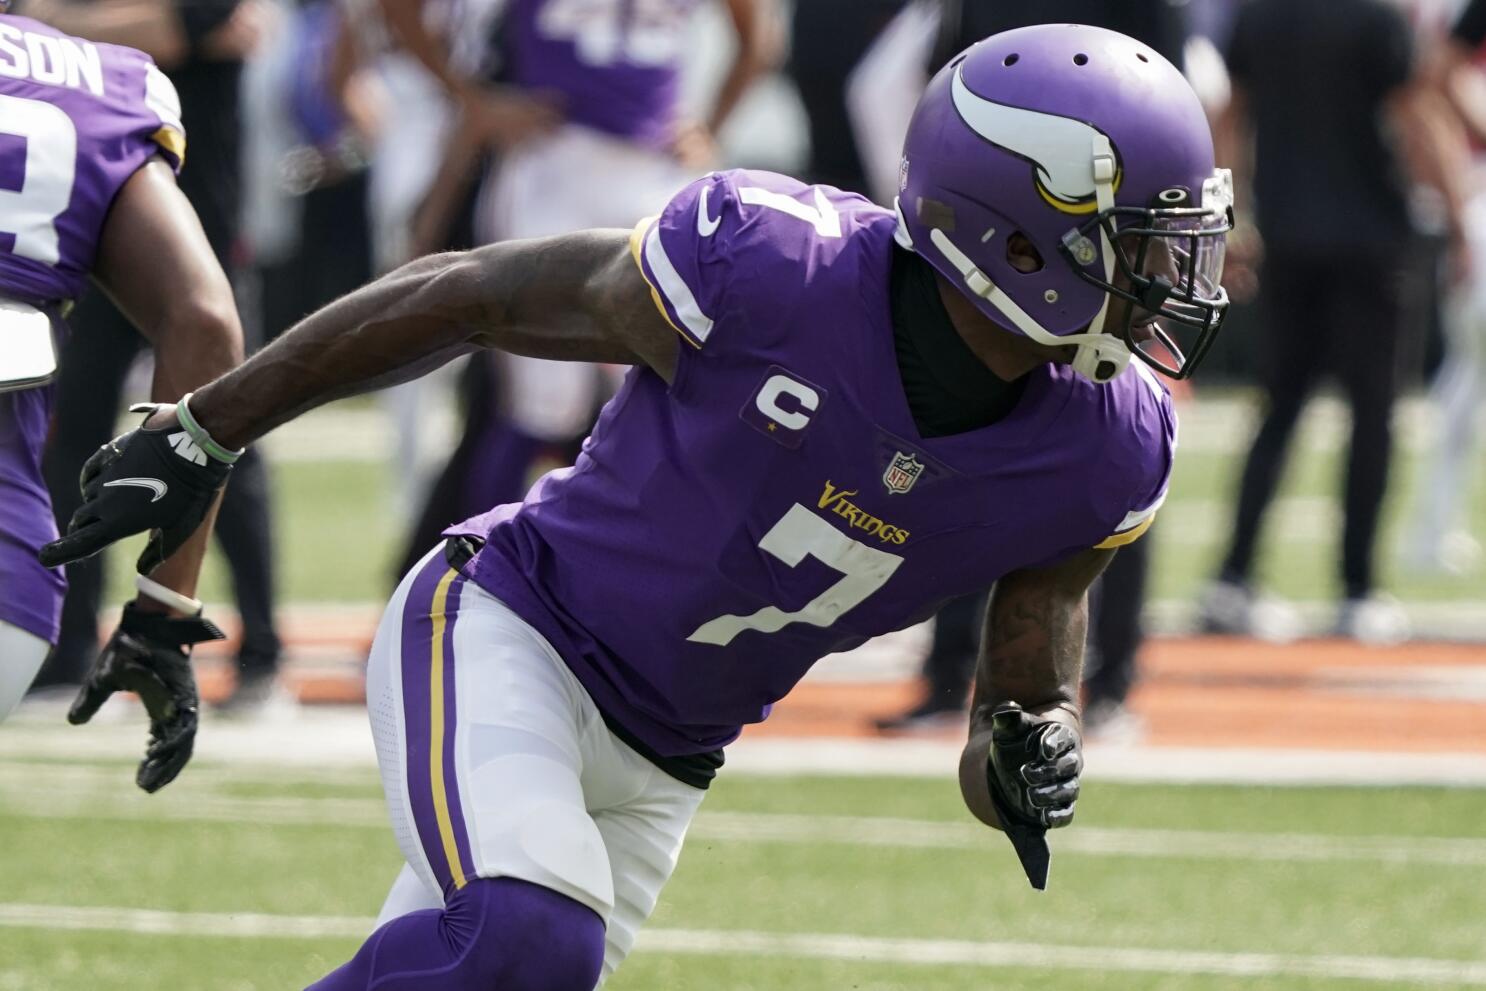 Born leader' Peterson guides Vikings D, to visit Cards next - The